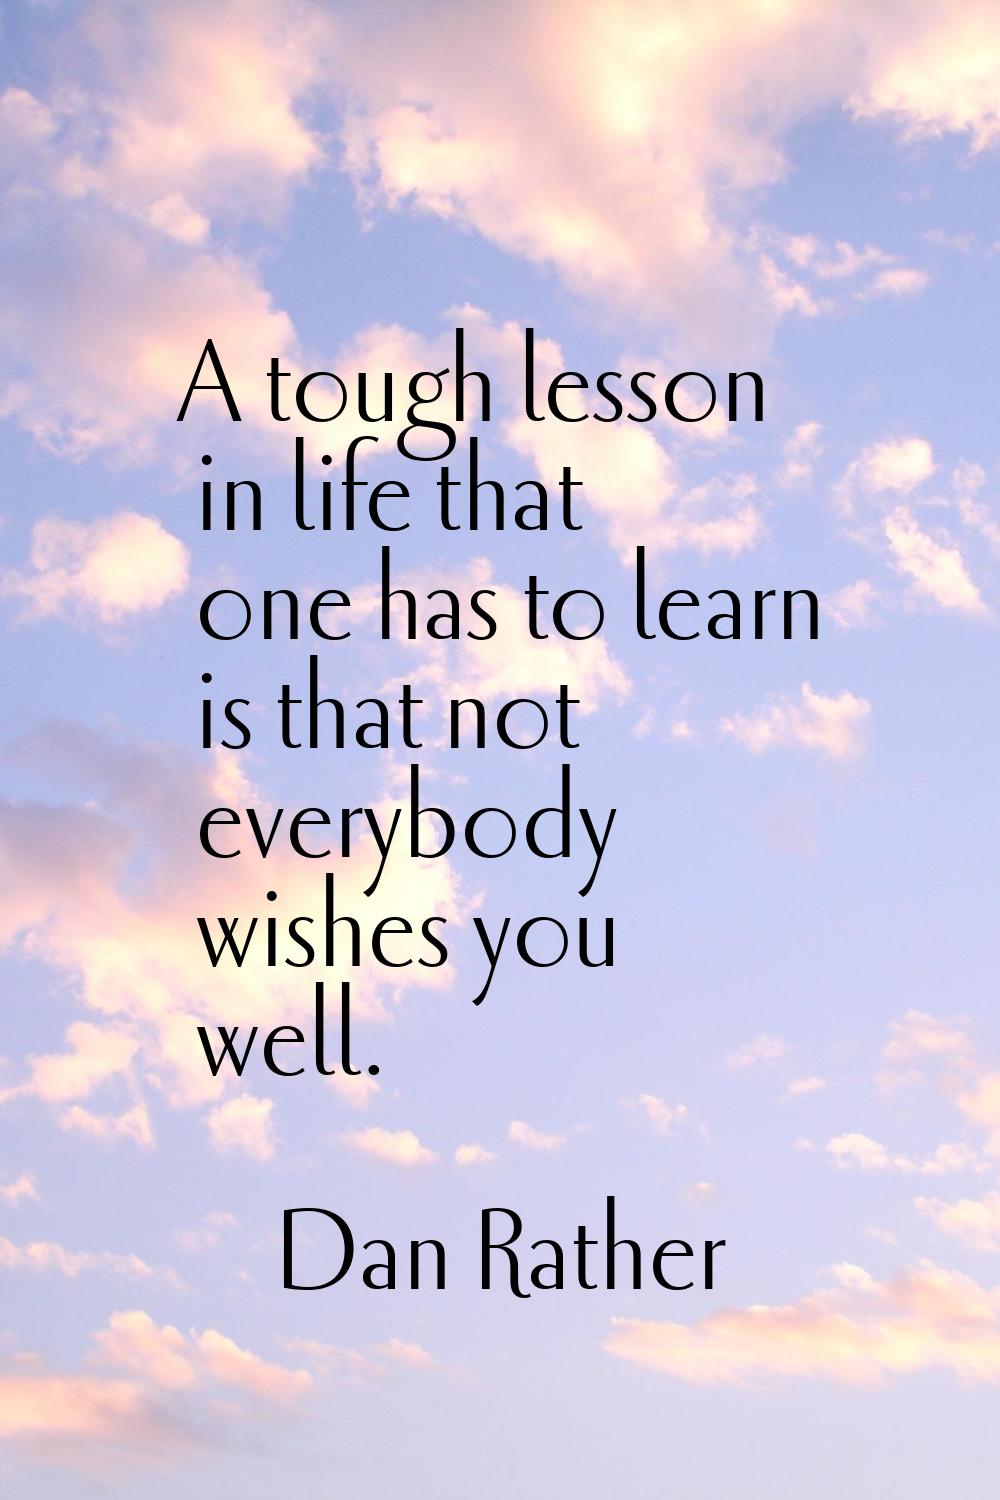 A tough lesson in life that one has to learn is that not everybody wishes you well.